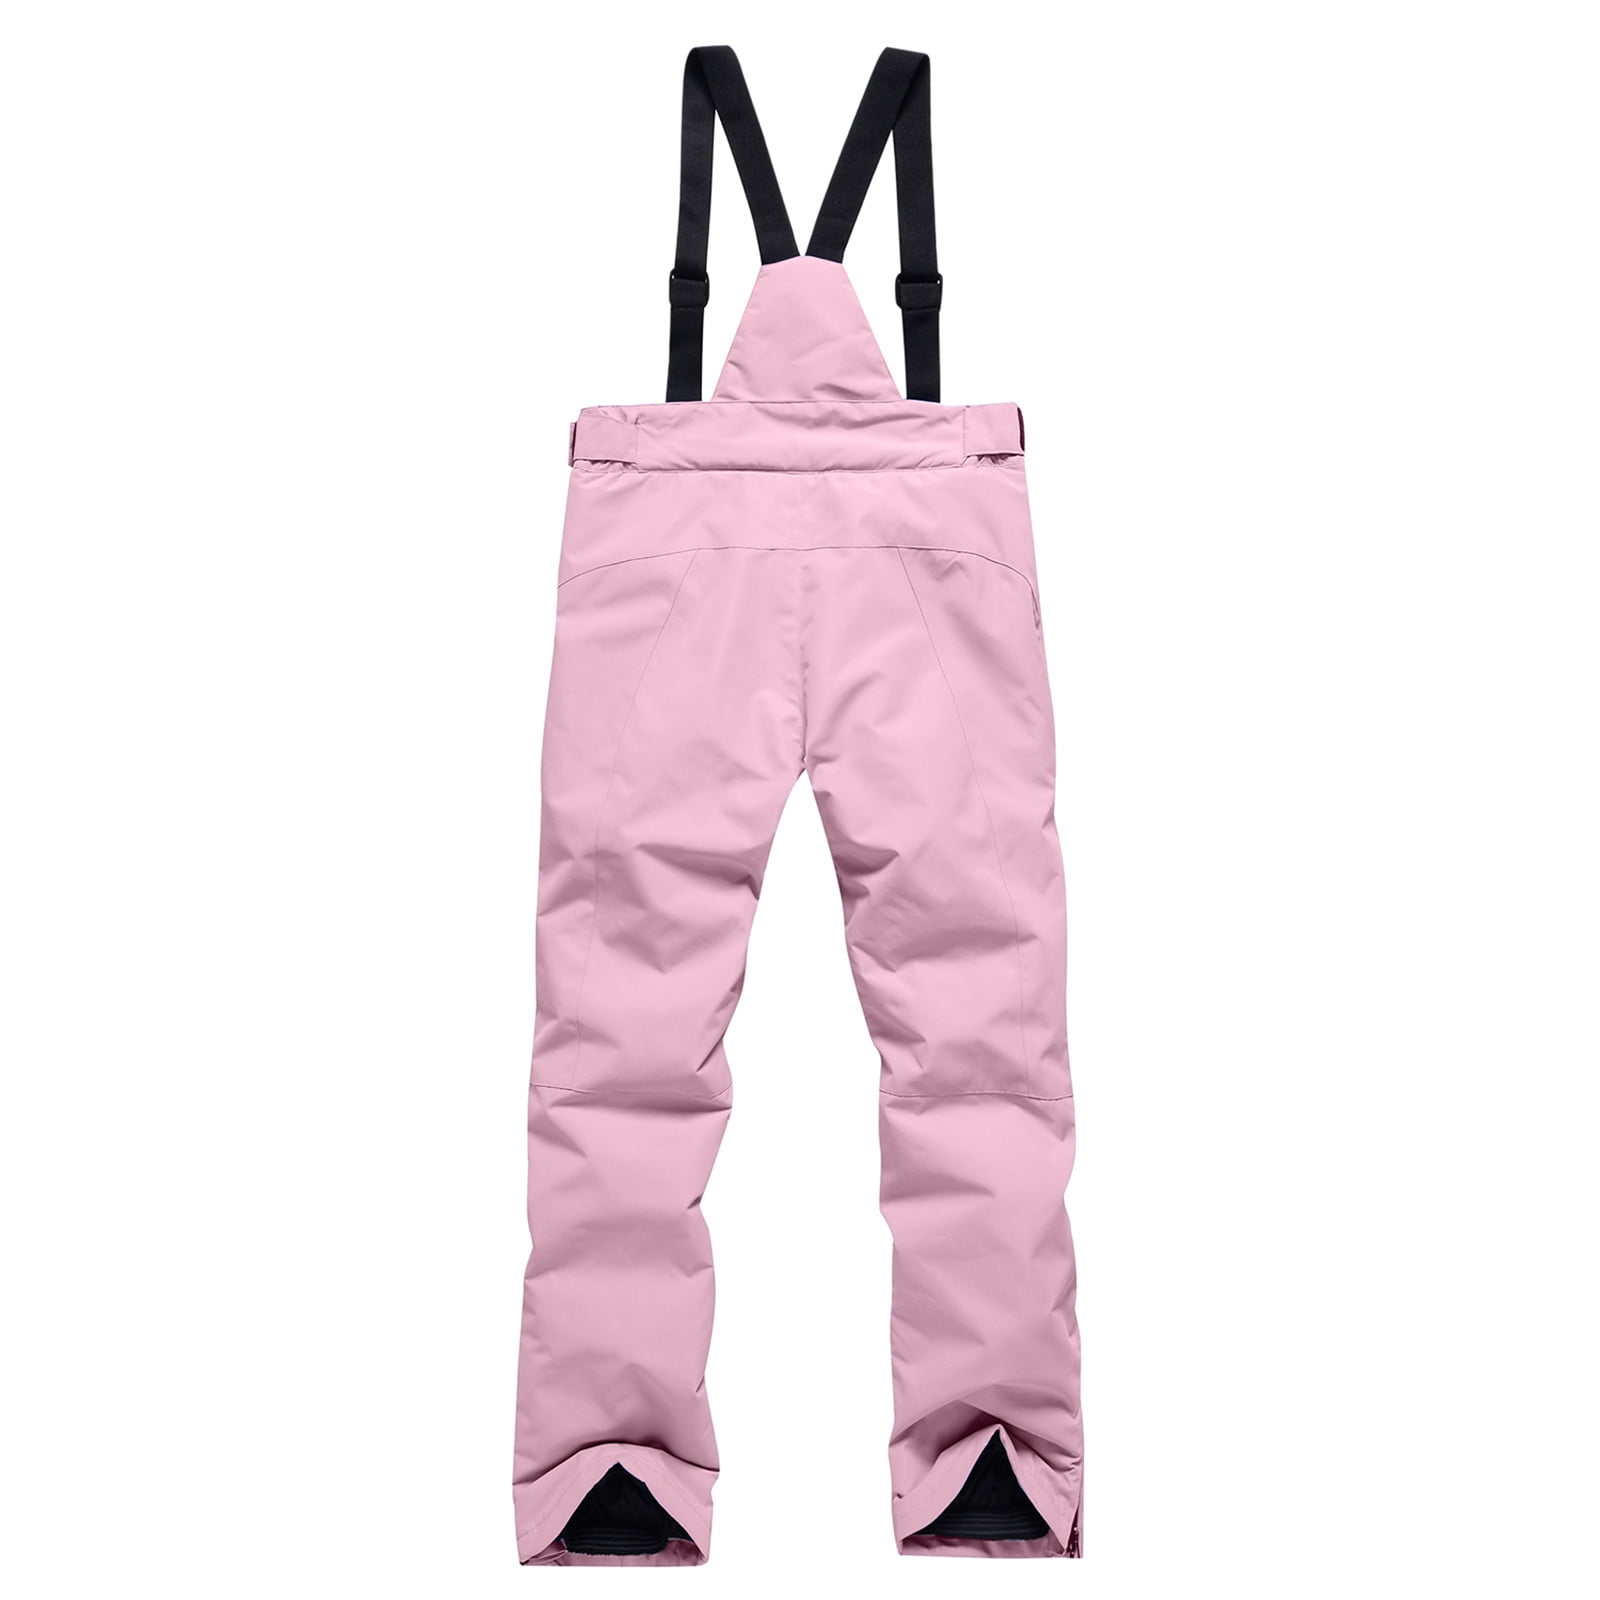 Ski pants with pockets Airflow 10K in Sugar Pink – Biddle and Bop